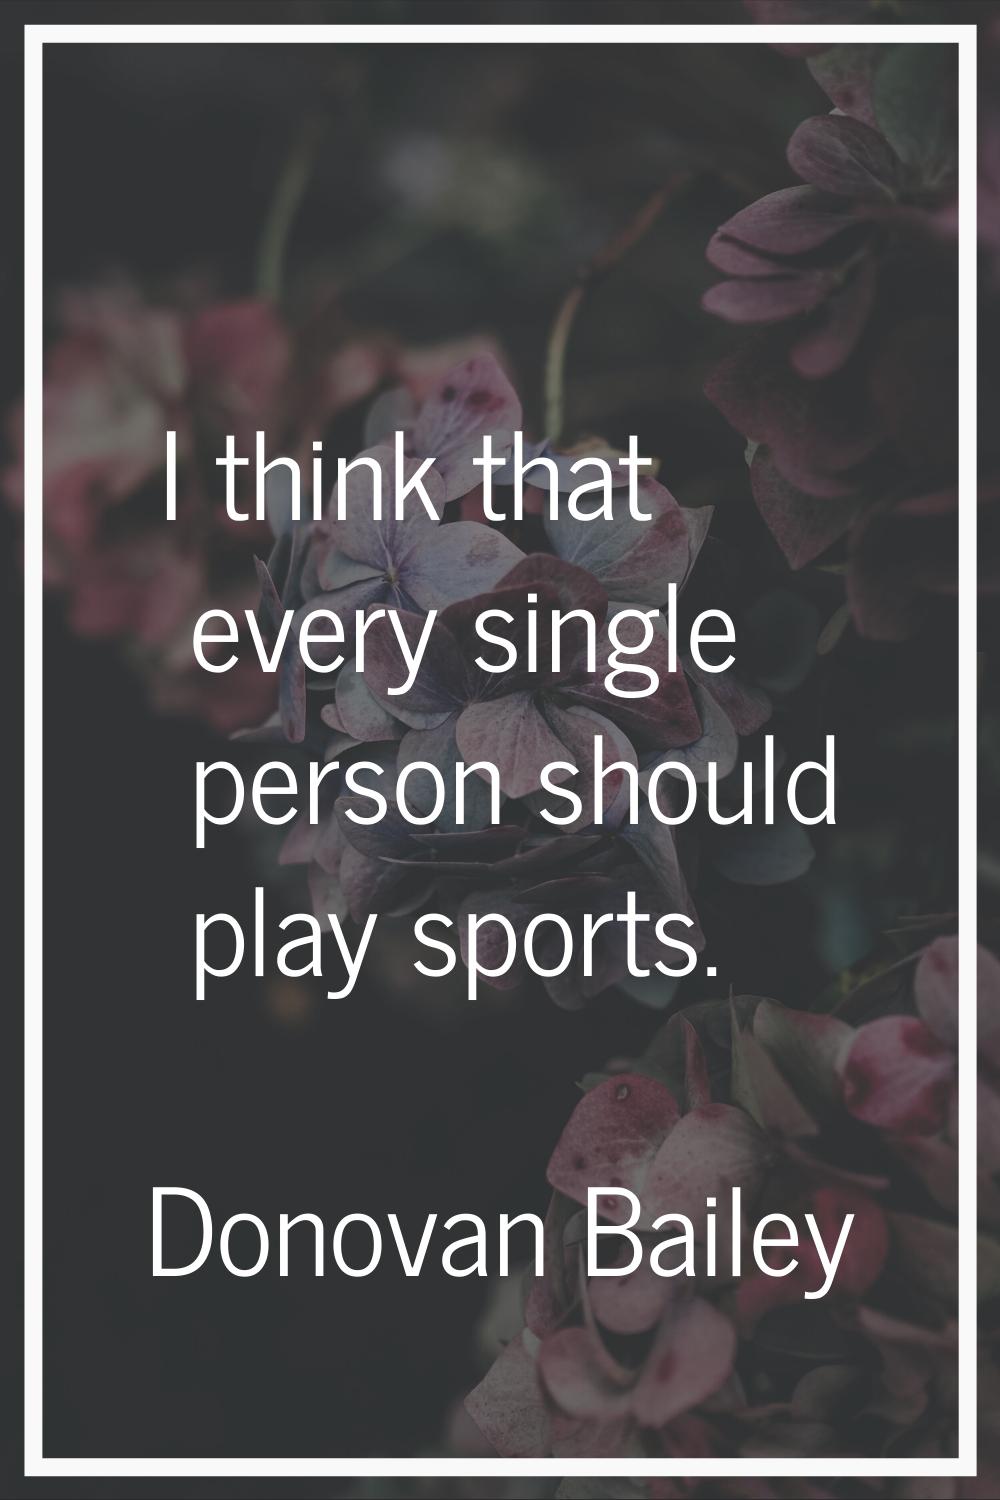 I think that every single person should play sports.